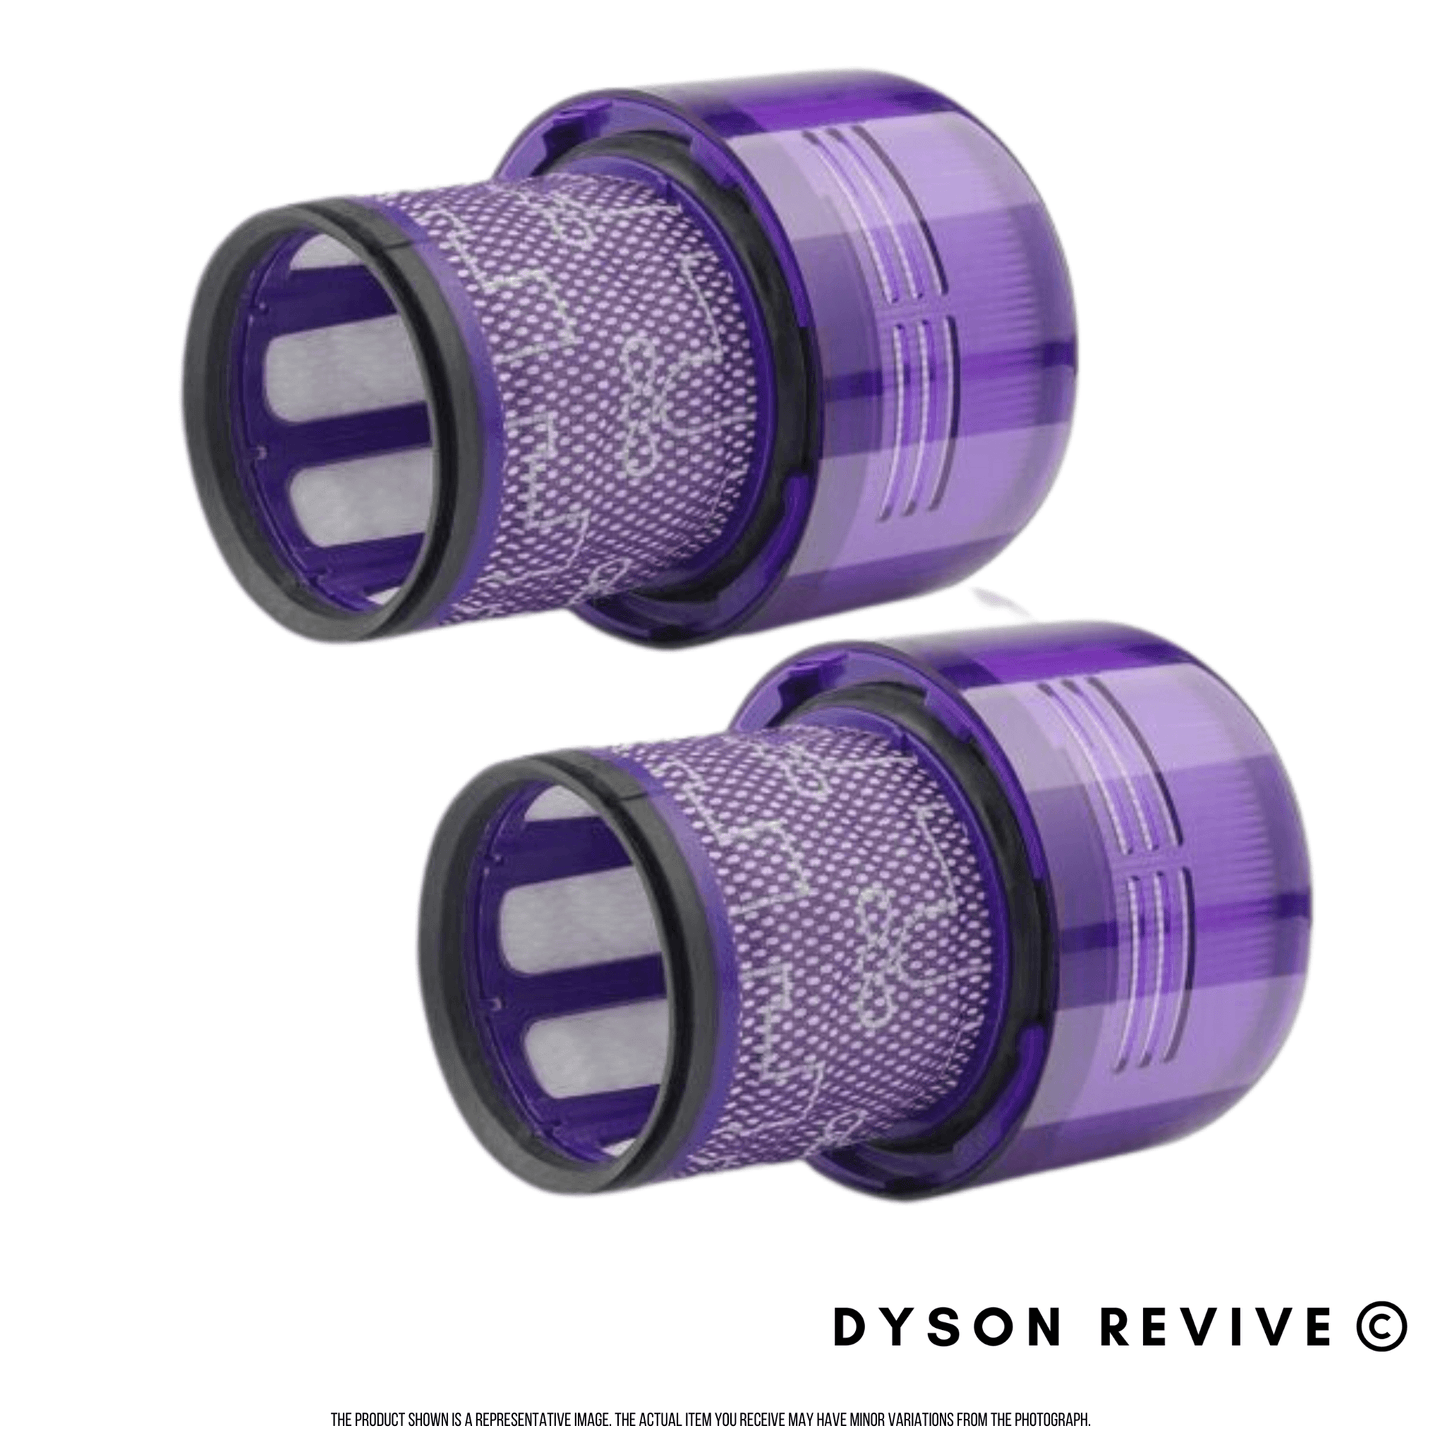 Brand New Compatible Dyson V11, V15 Vacuum Filter for V11 series Cyclone Torque Drive Animal - Dyson Revive